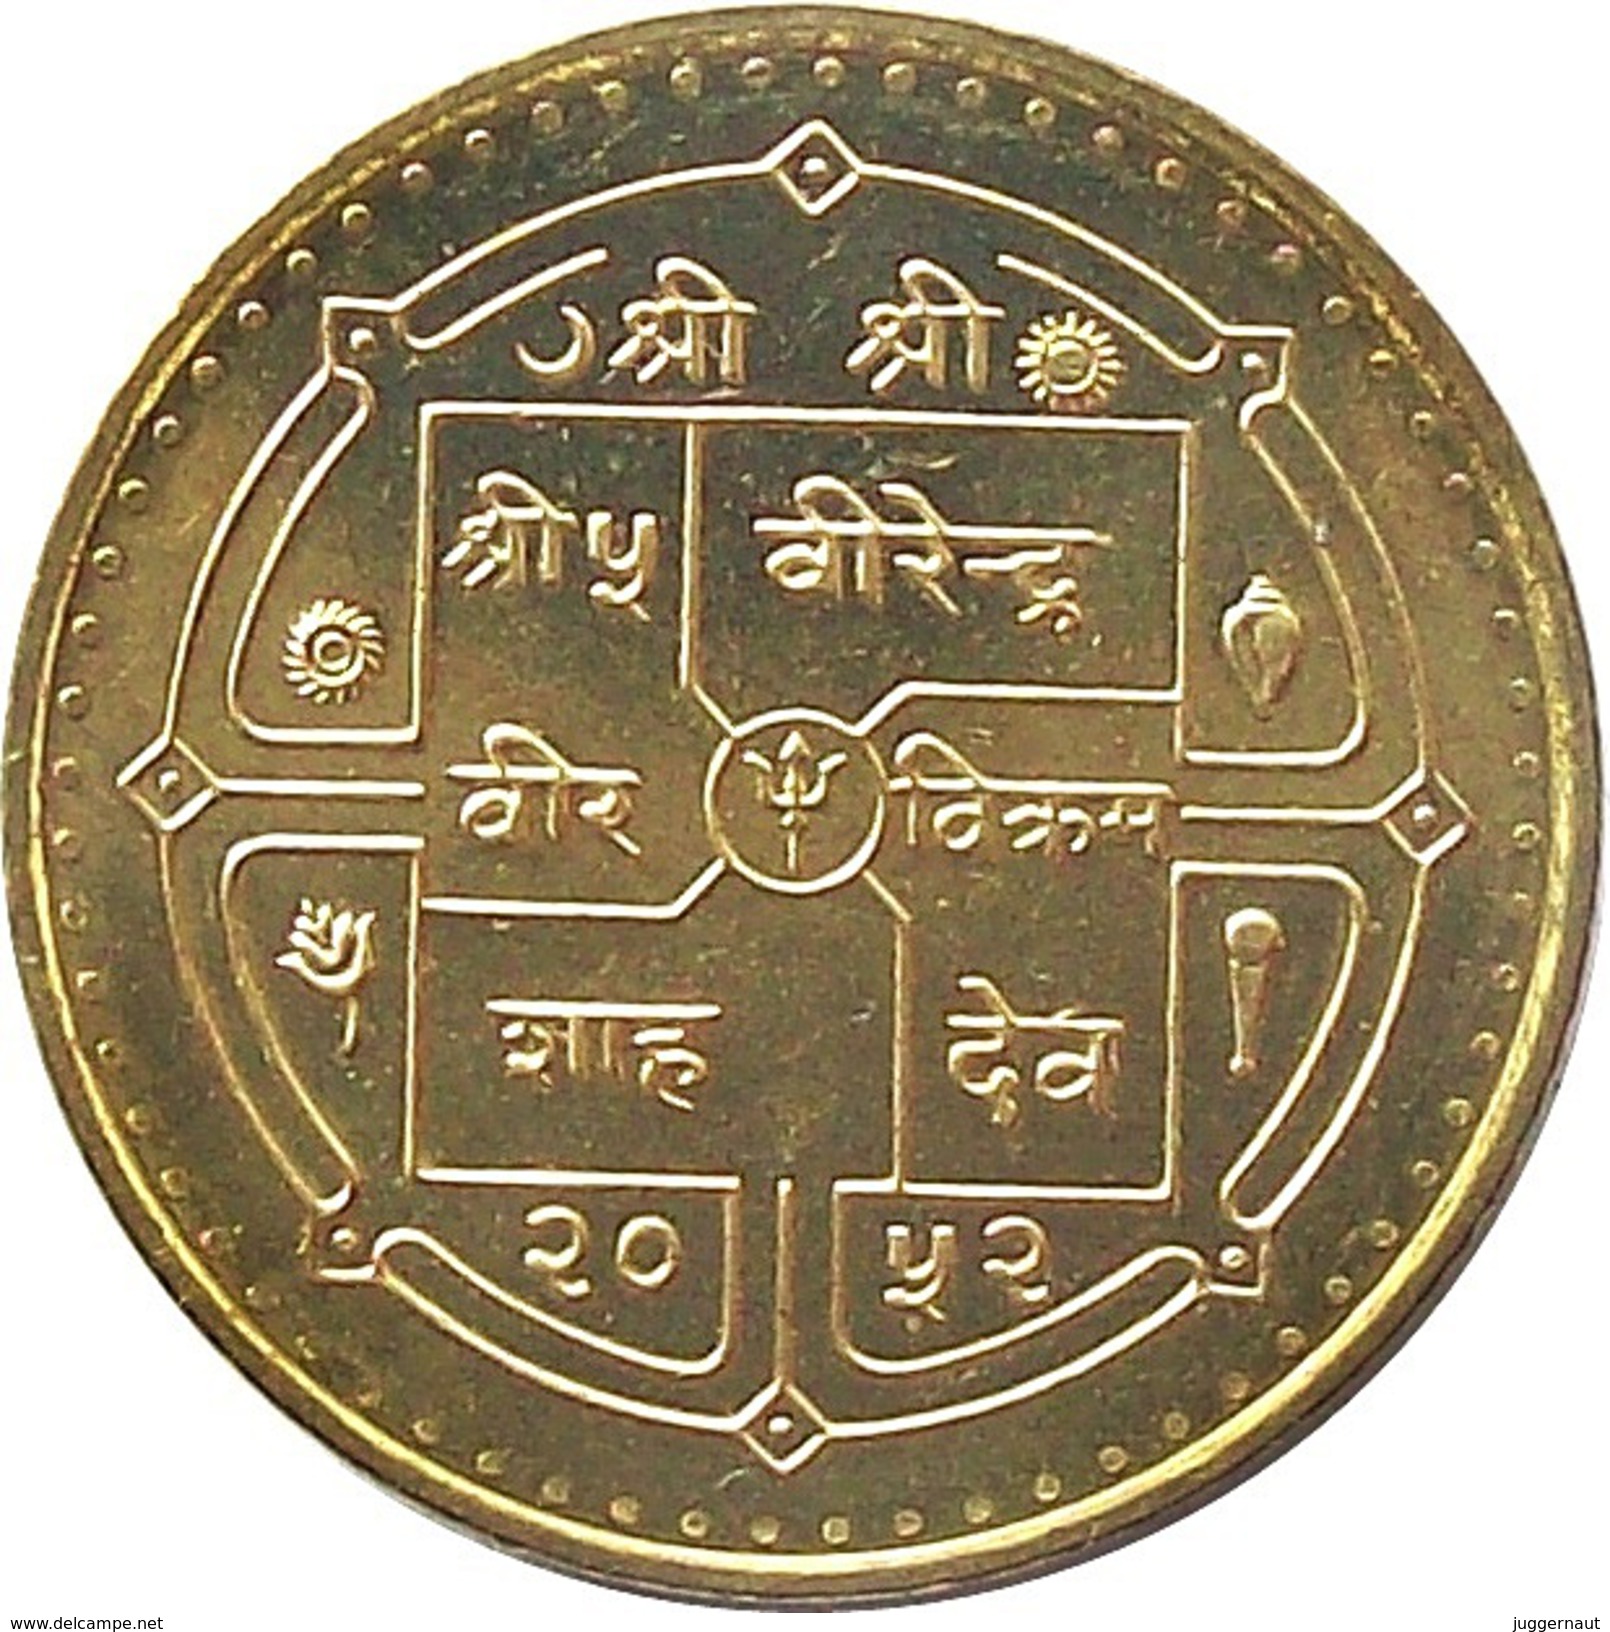 UNITED NATIONS GOLDEN JUBILEE RUPEE 1 BRASS-STEEL COIN NEPAL 1995 KM-1092 UNCIRCULATED UNC - Népal